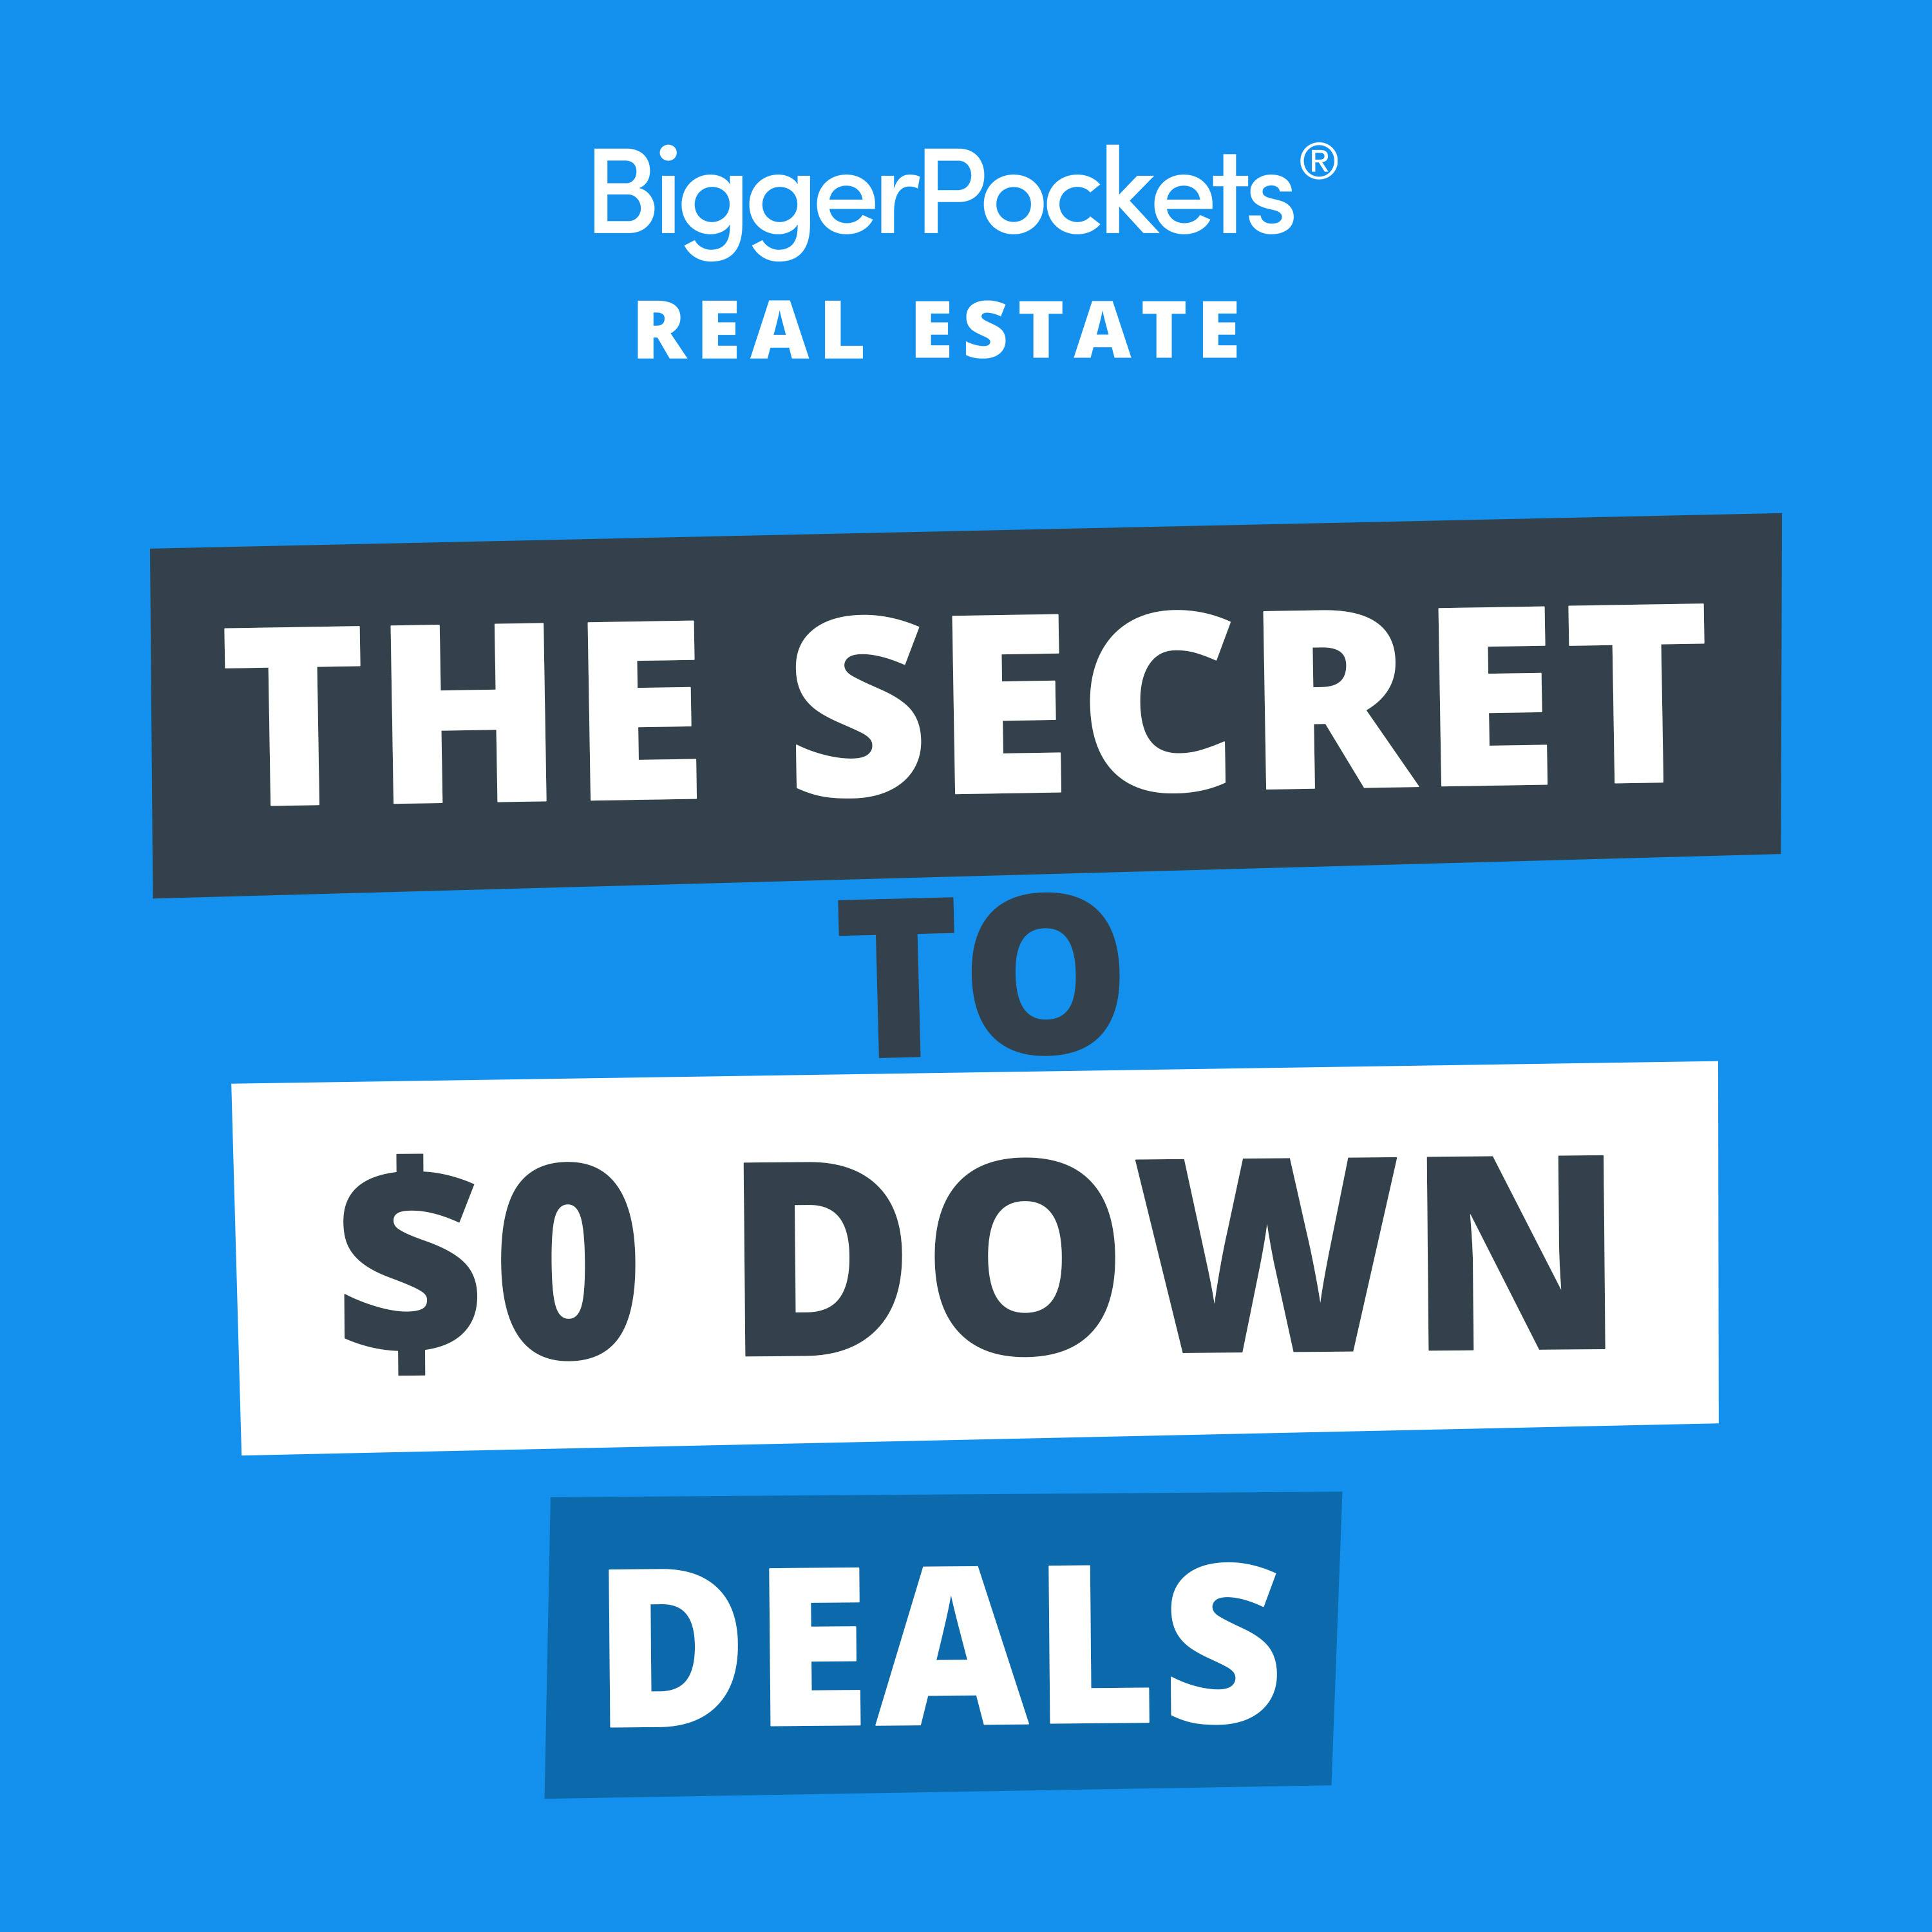 757: $0 Down Deals, 3% Interest Rates, and Insane Property Purchases w/Pace Morby